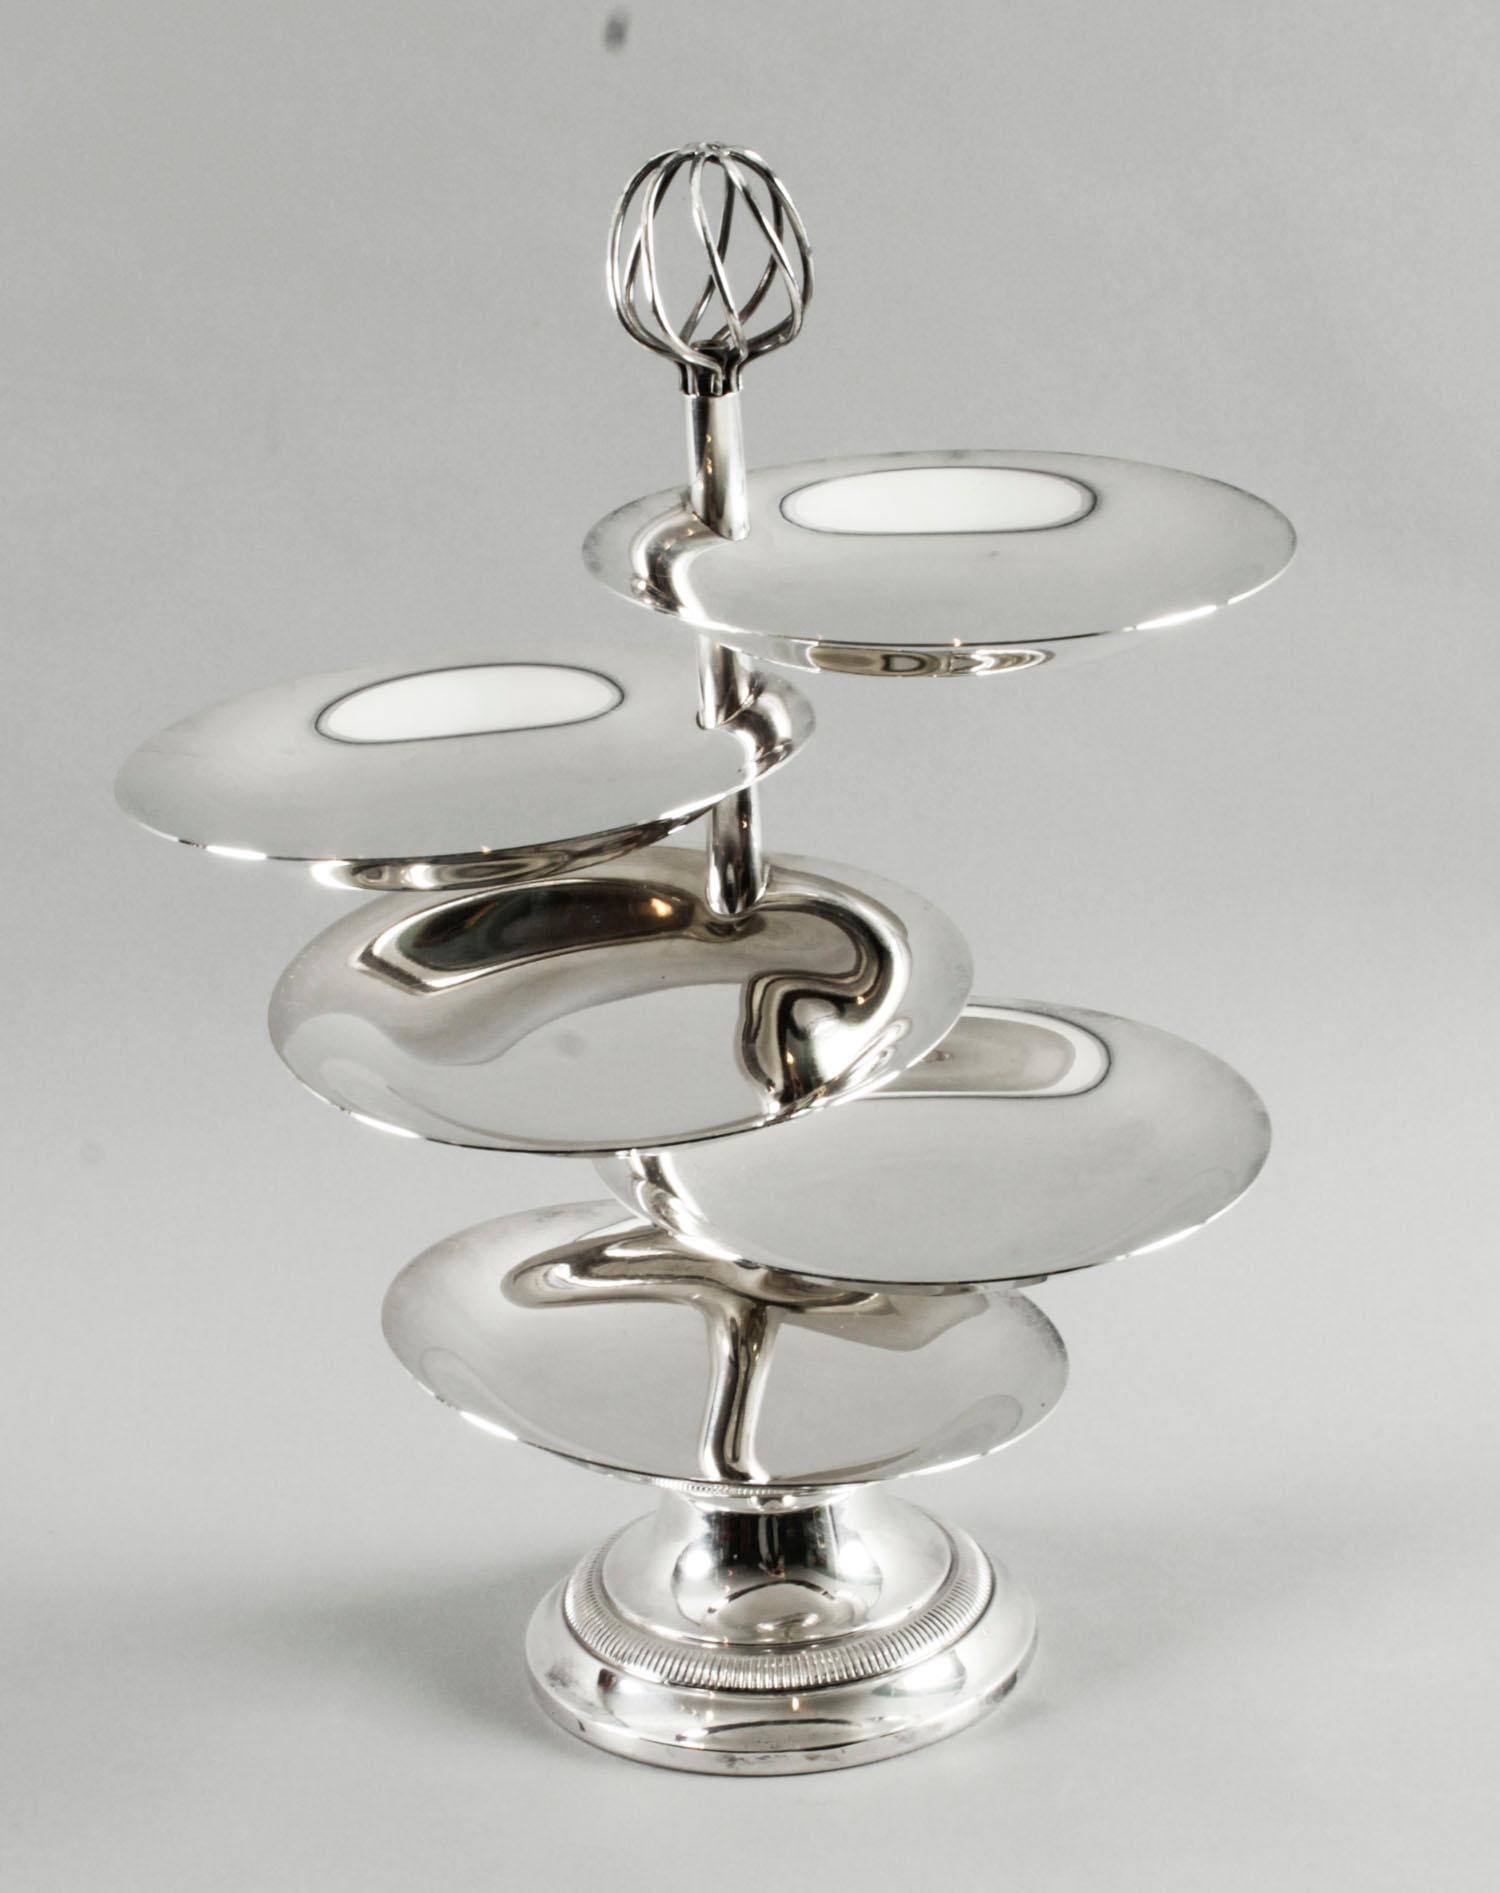 Antique Silver Plated Hors d'oeuvres Stand by Christofle 19th C In Good Condition For Sale In London, GB